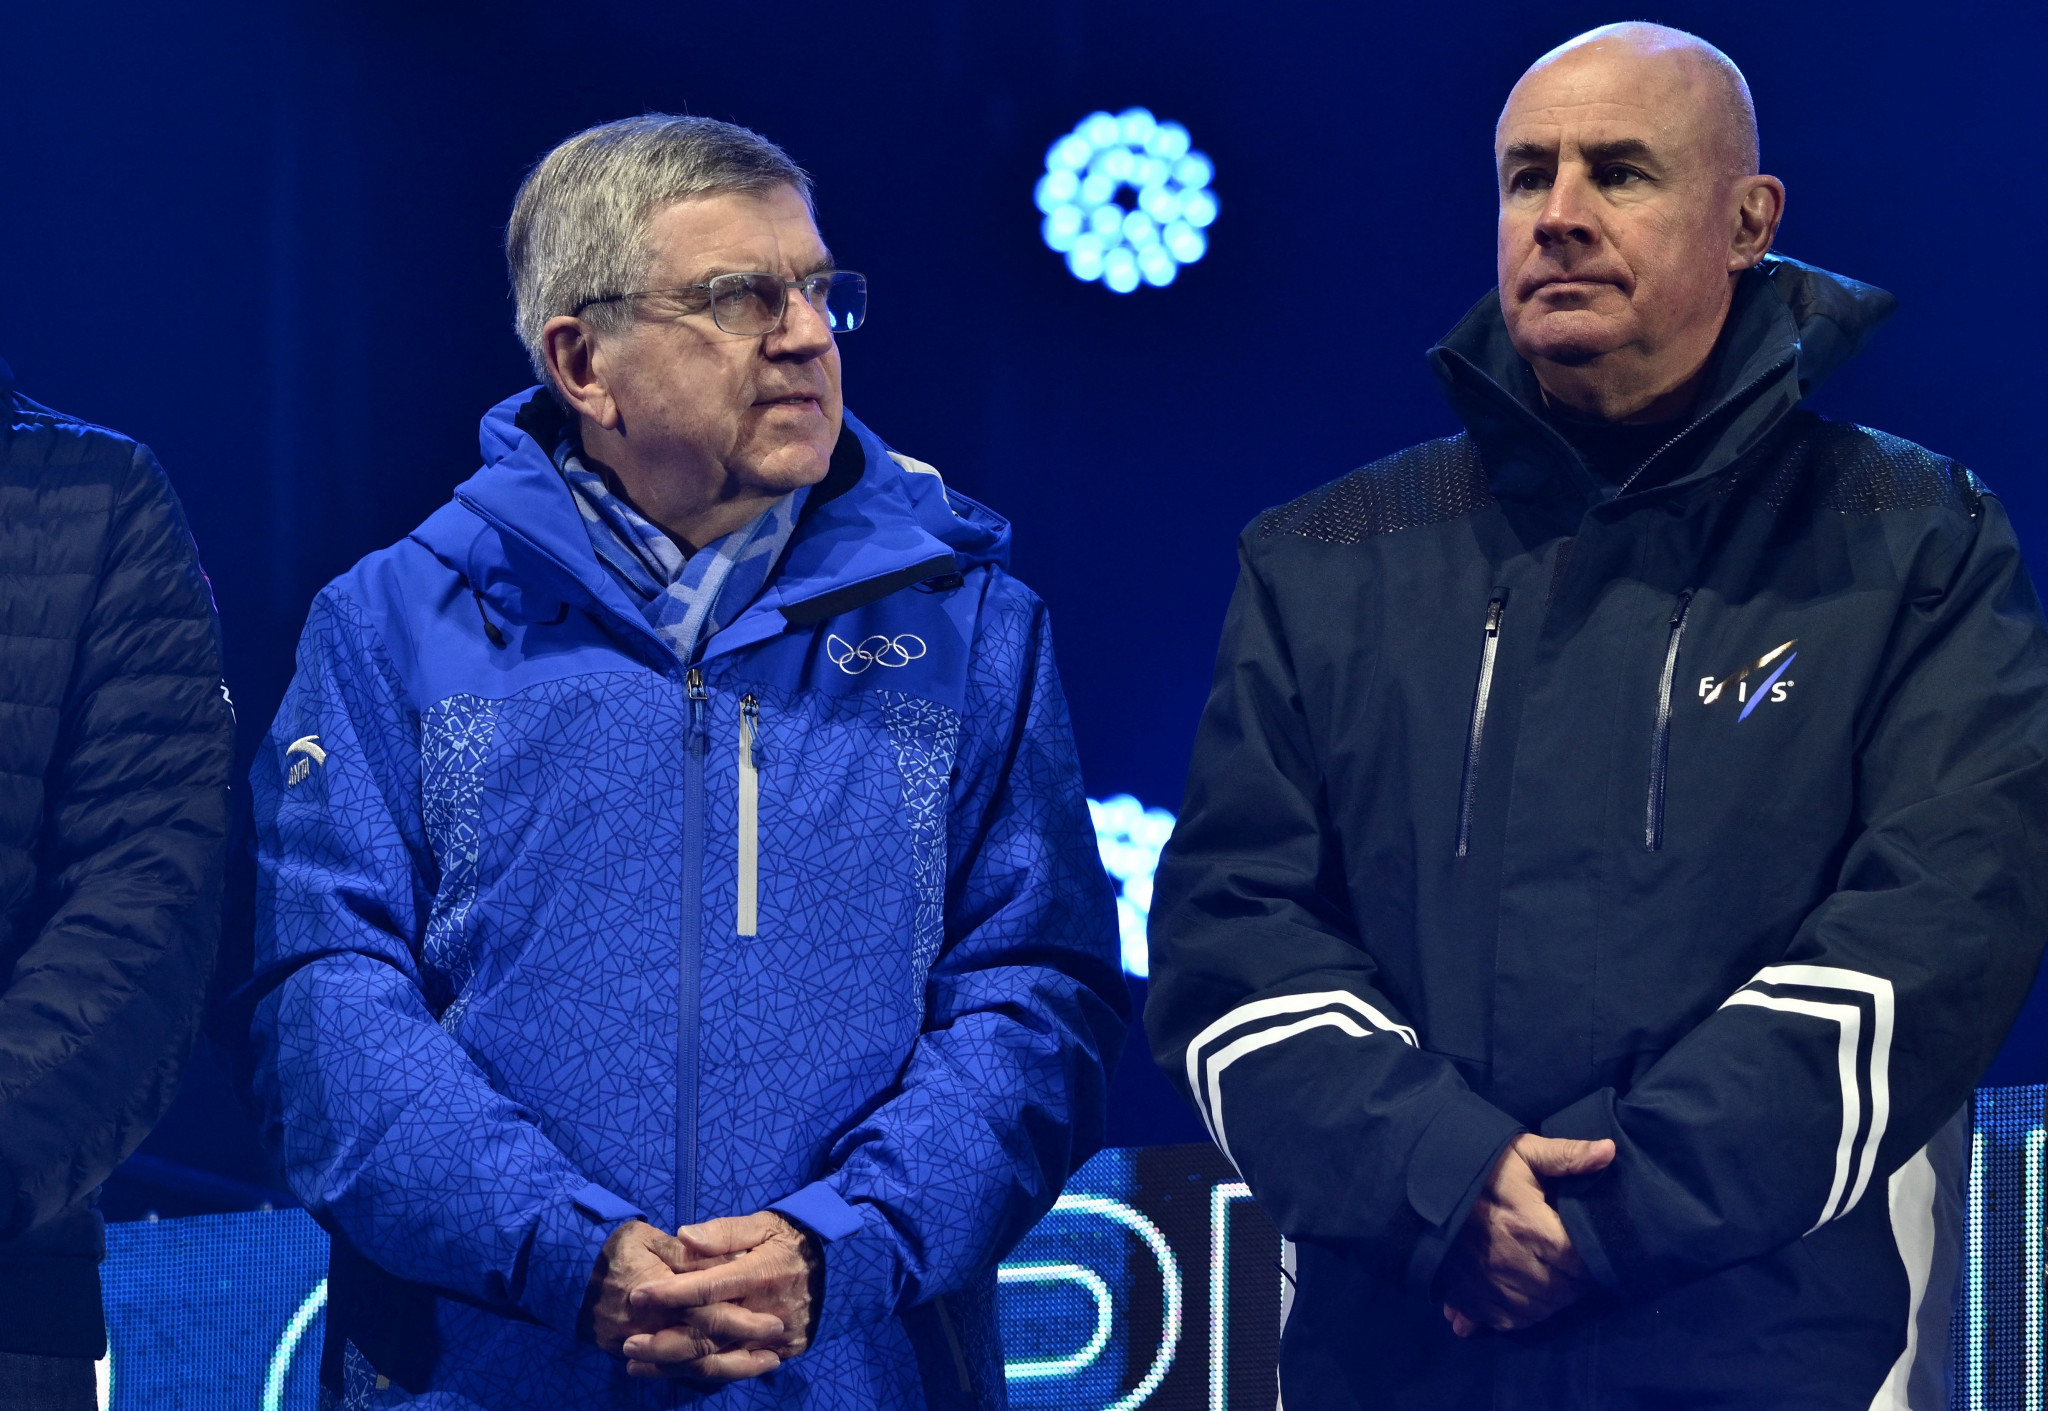 IOC President Thomas Bach stands next to FIS leader Johan Eliasch when watching the men's downhill competition at the Alpine Ski World Championships ©Getty Images